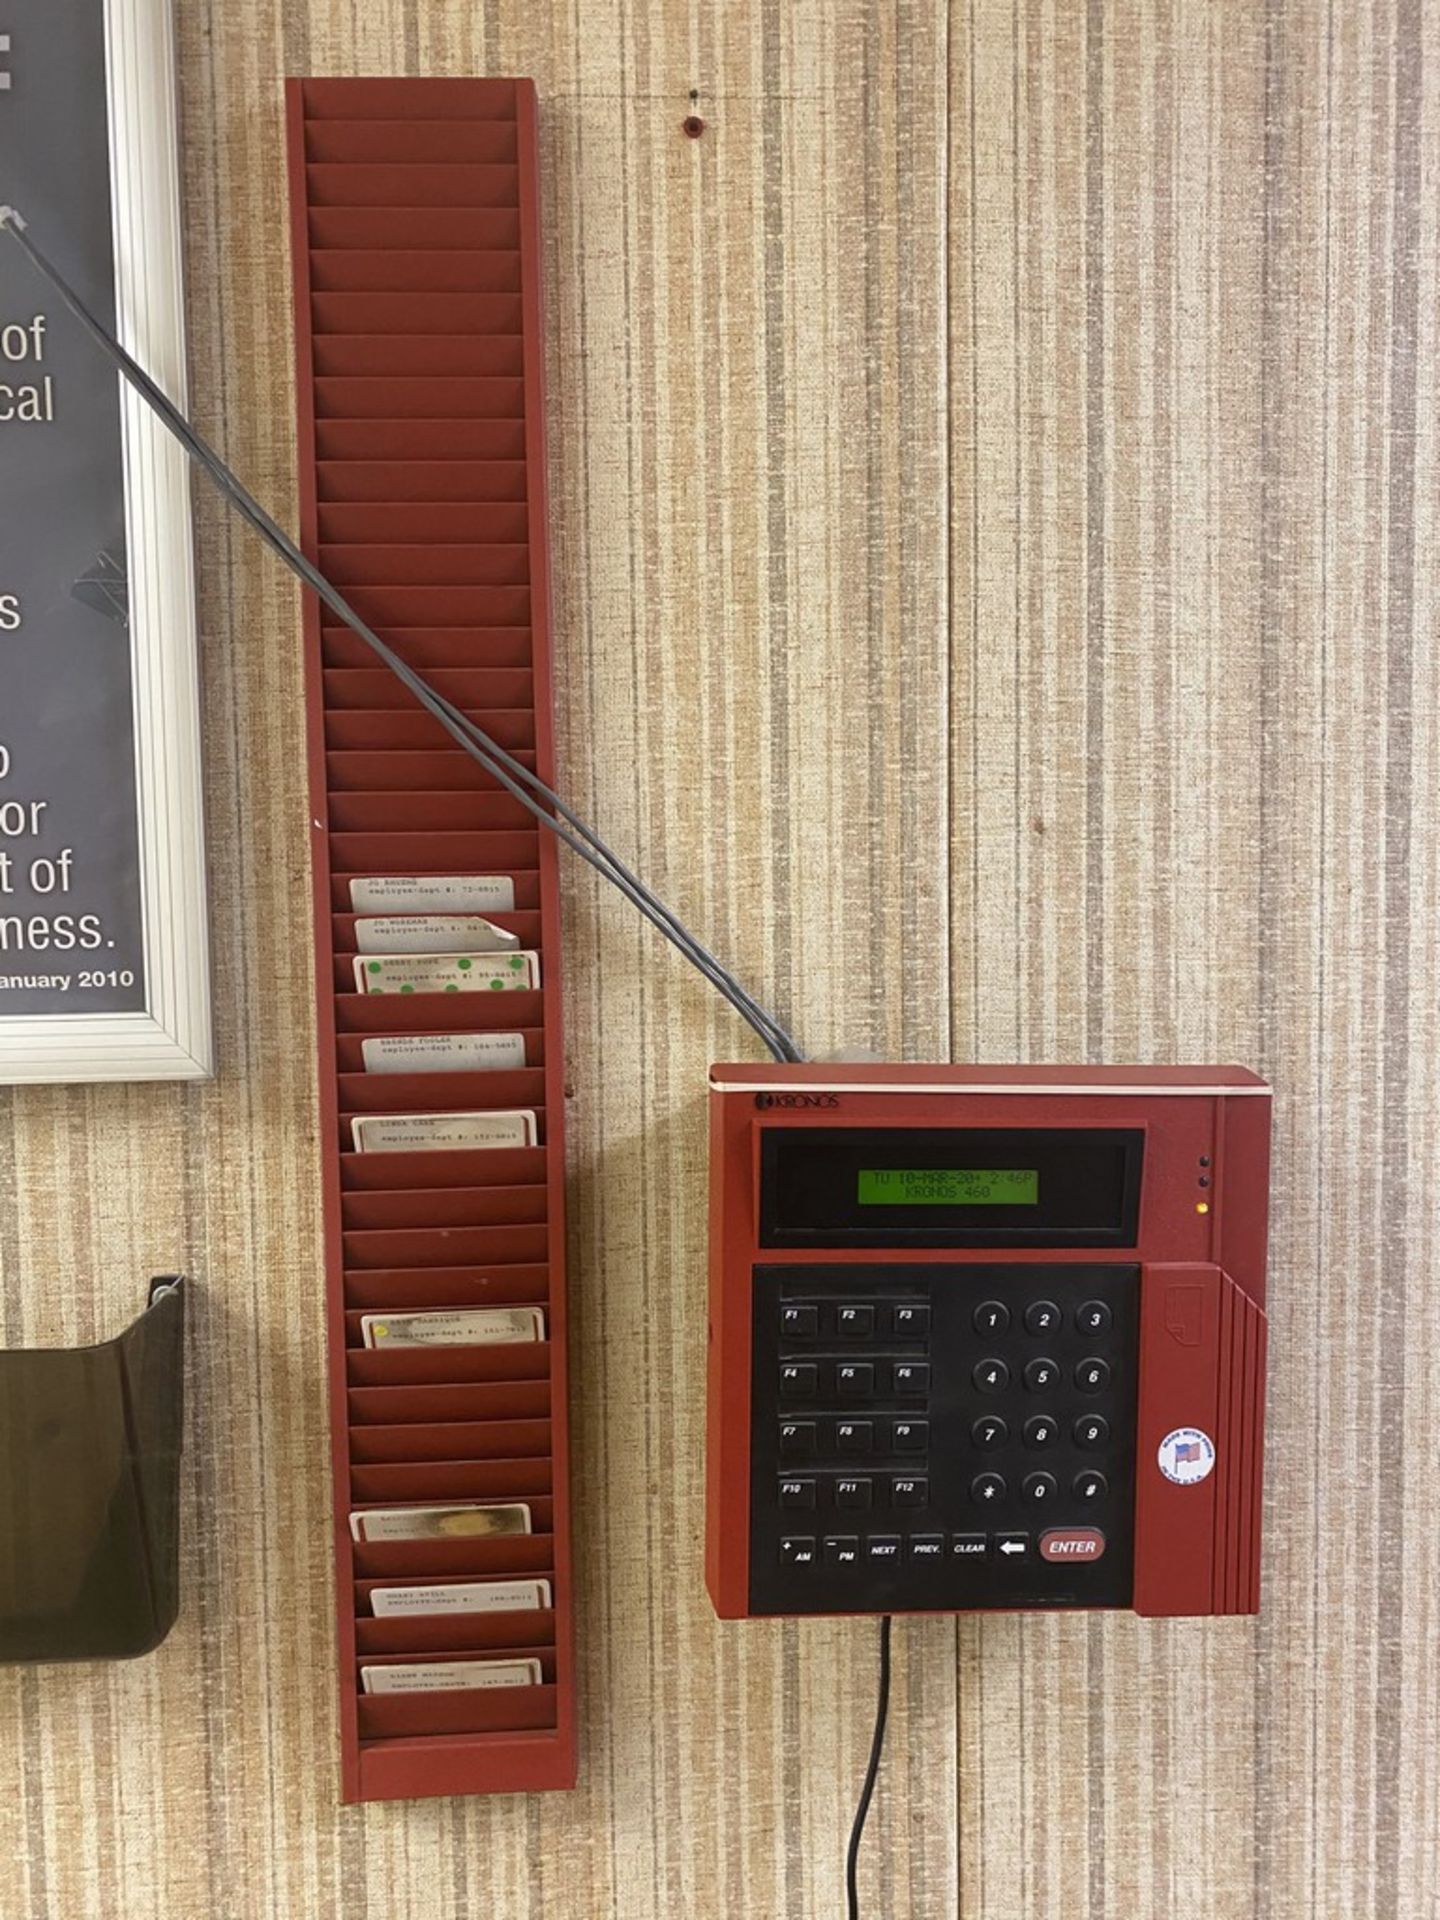 KRONOS TIME CLOCK SYSTEM WITH (3) STATIONS, CARD HOLDERS - Image 2 of 3